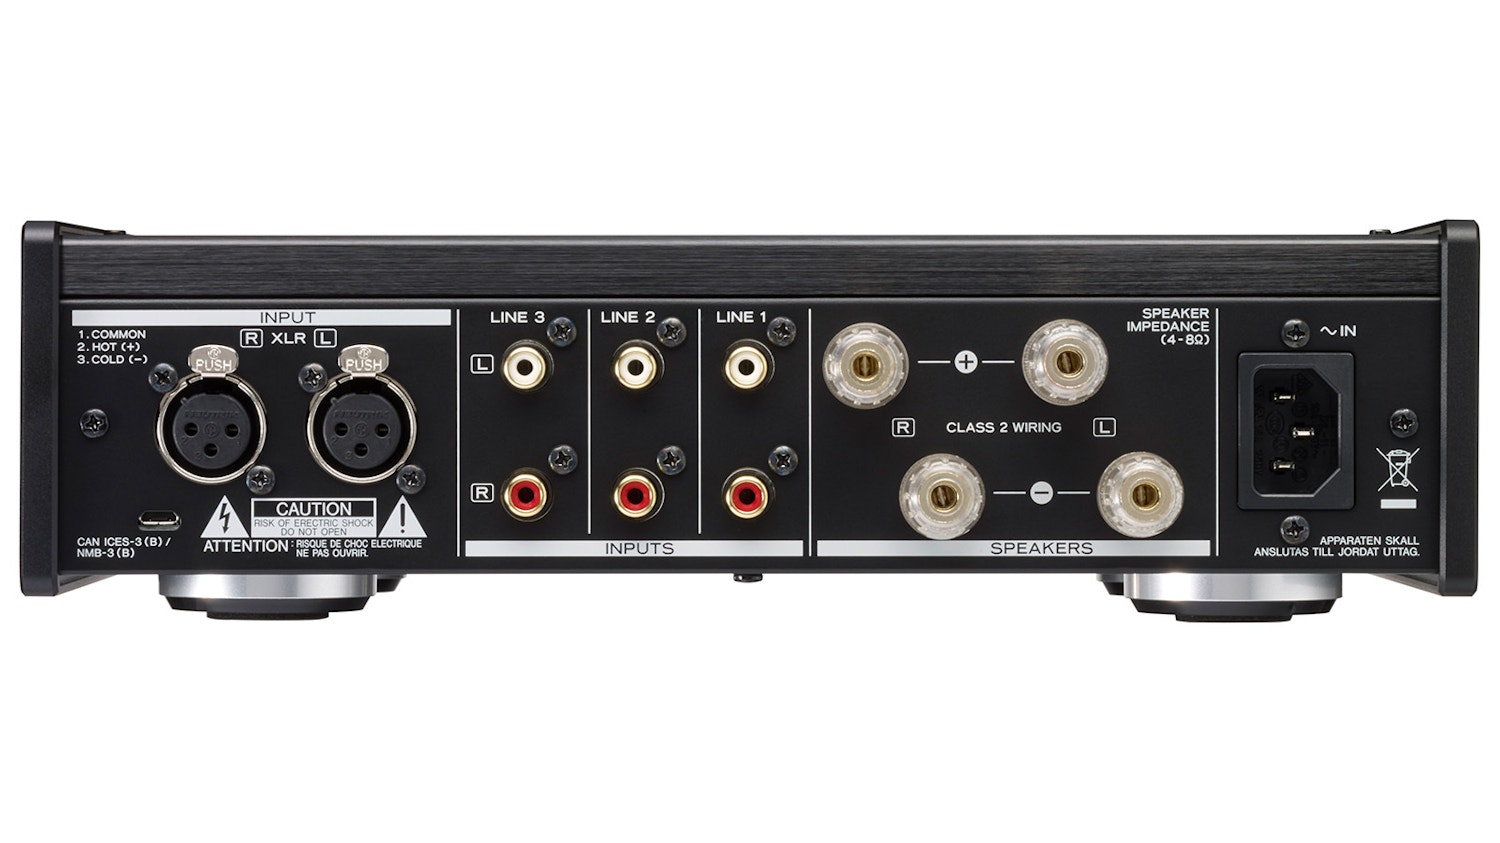 AX-505B Stereo Integrated Amplifier | TEAC USA